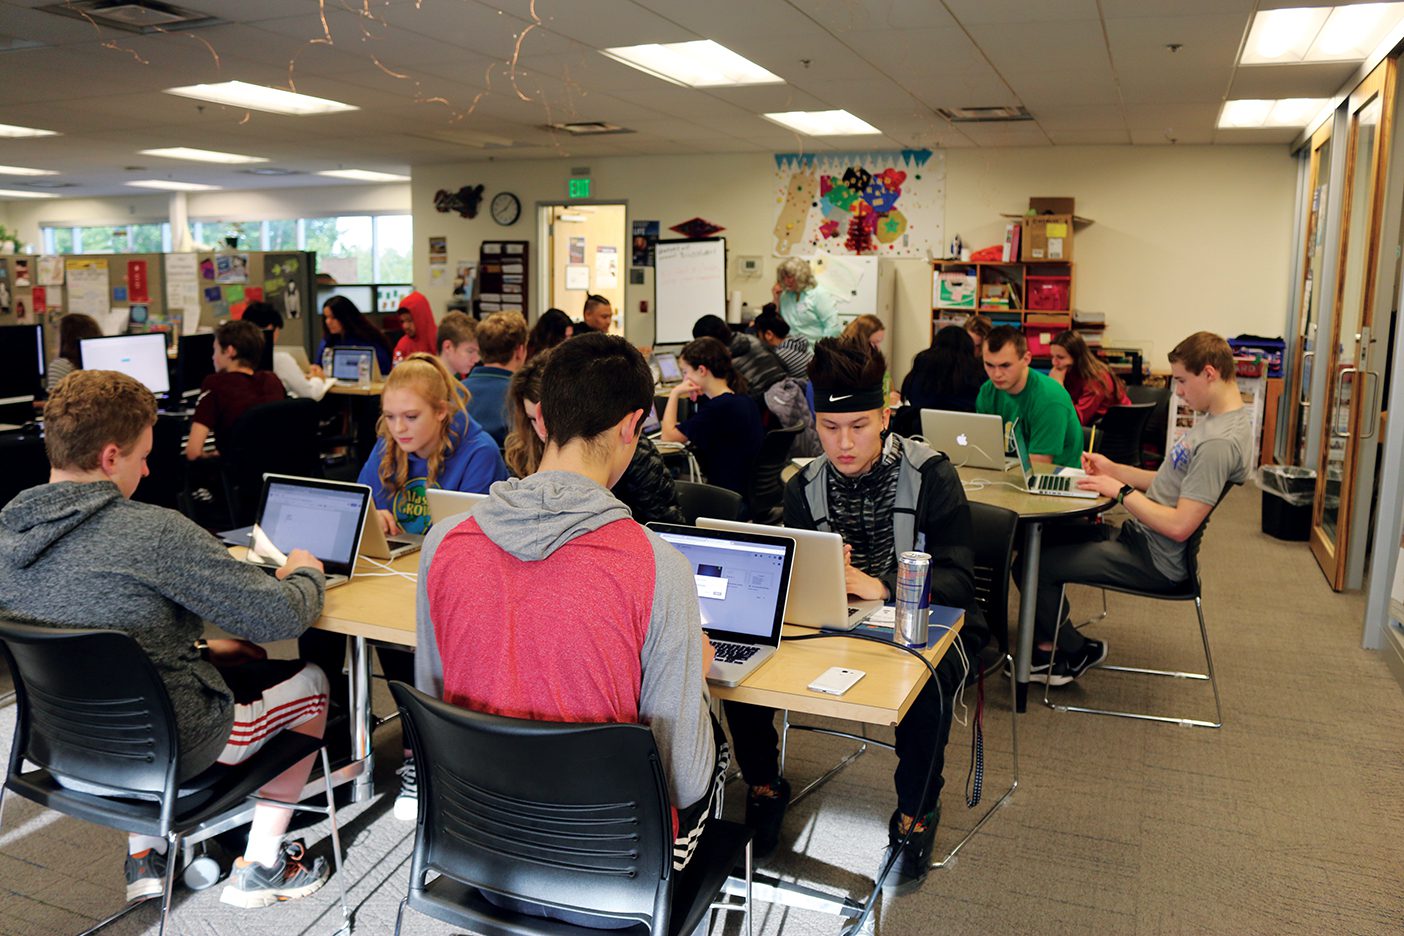 High school students work on college prep coursework on laptops in a classroom.